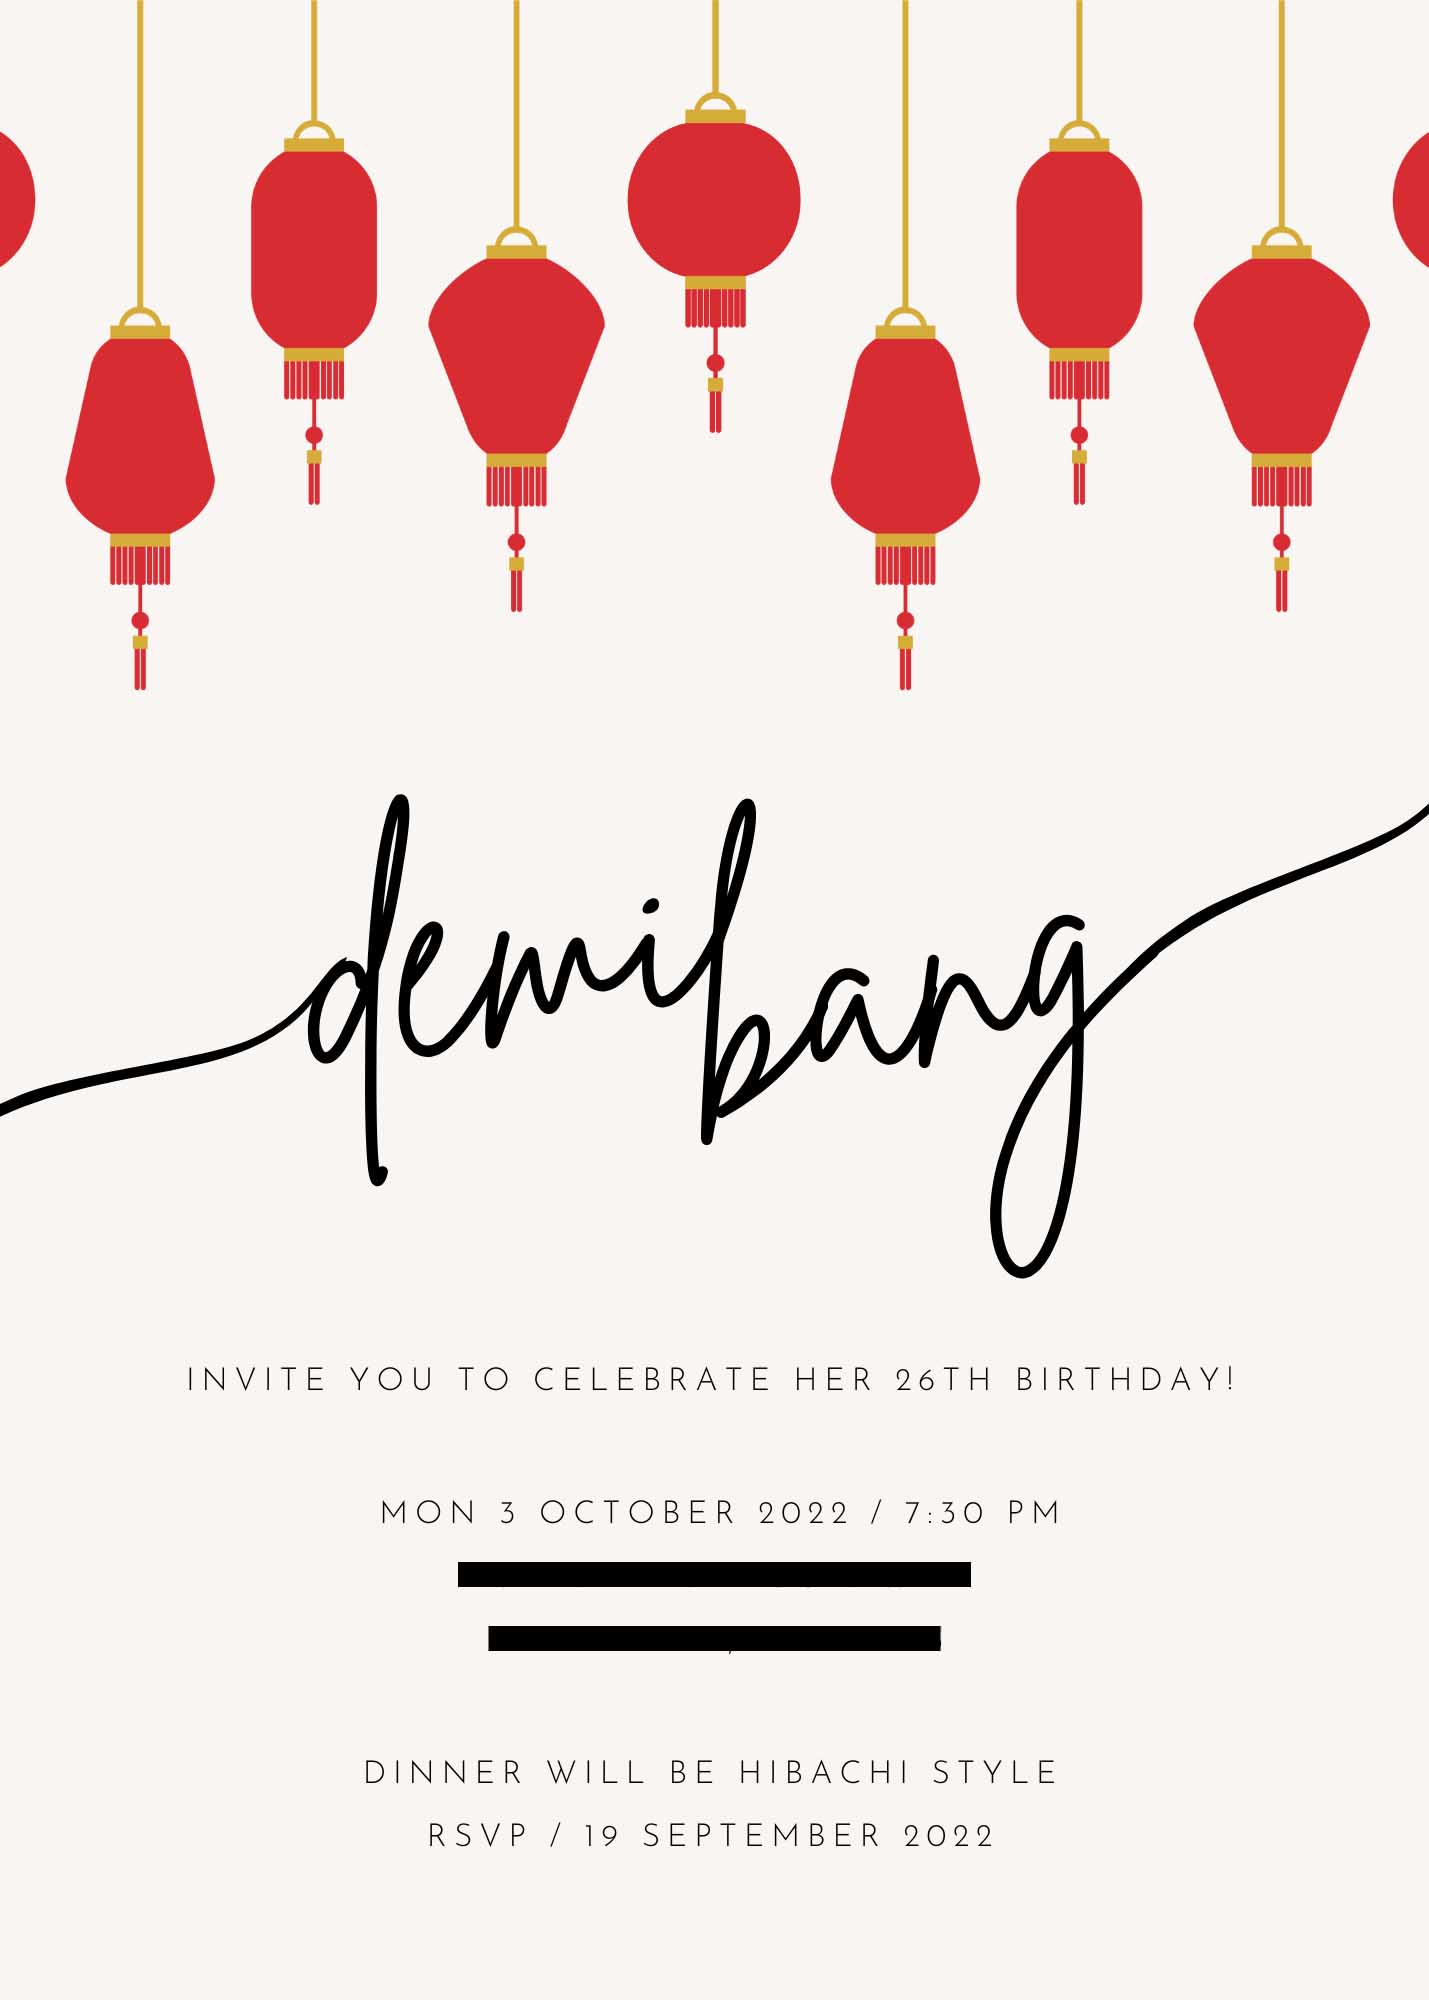 Blogger Demi Bang hosts a birthday dinner hibachi style for her friends.